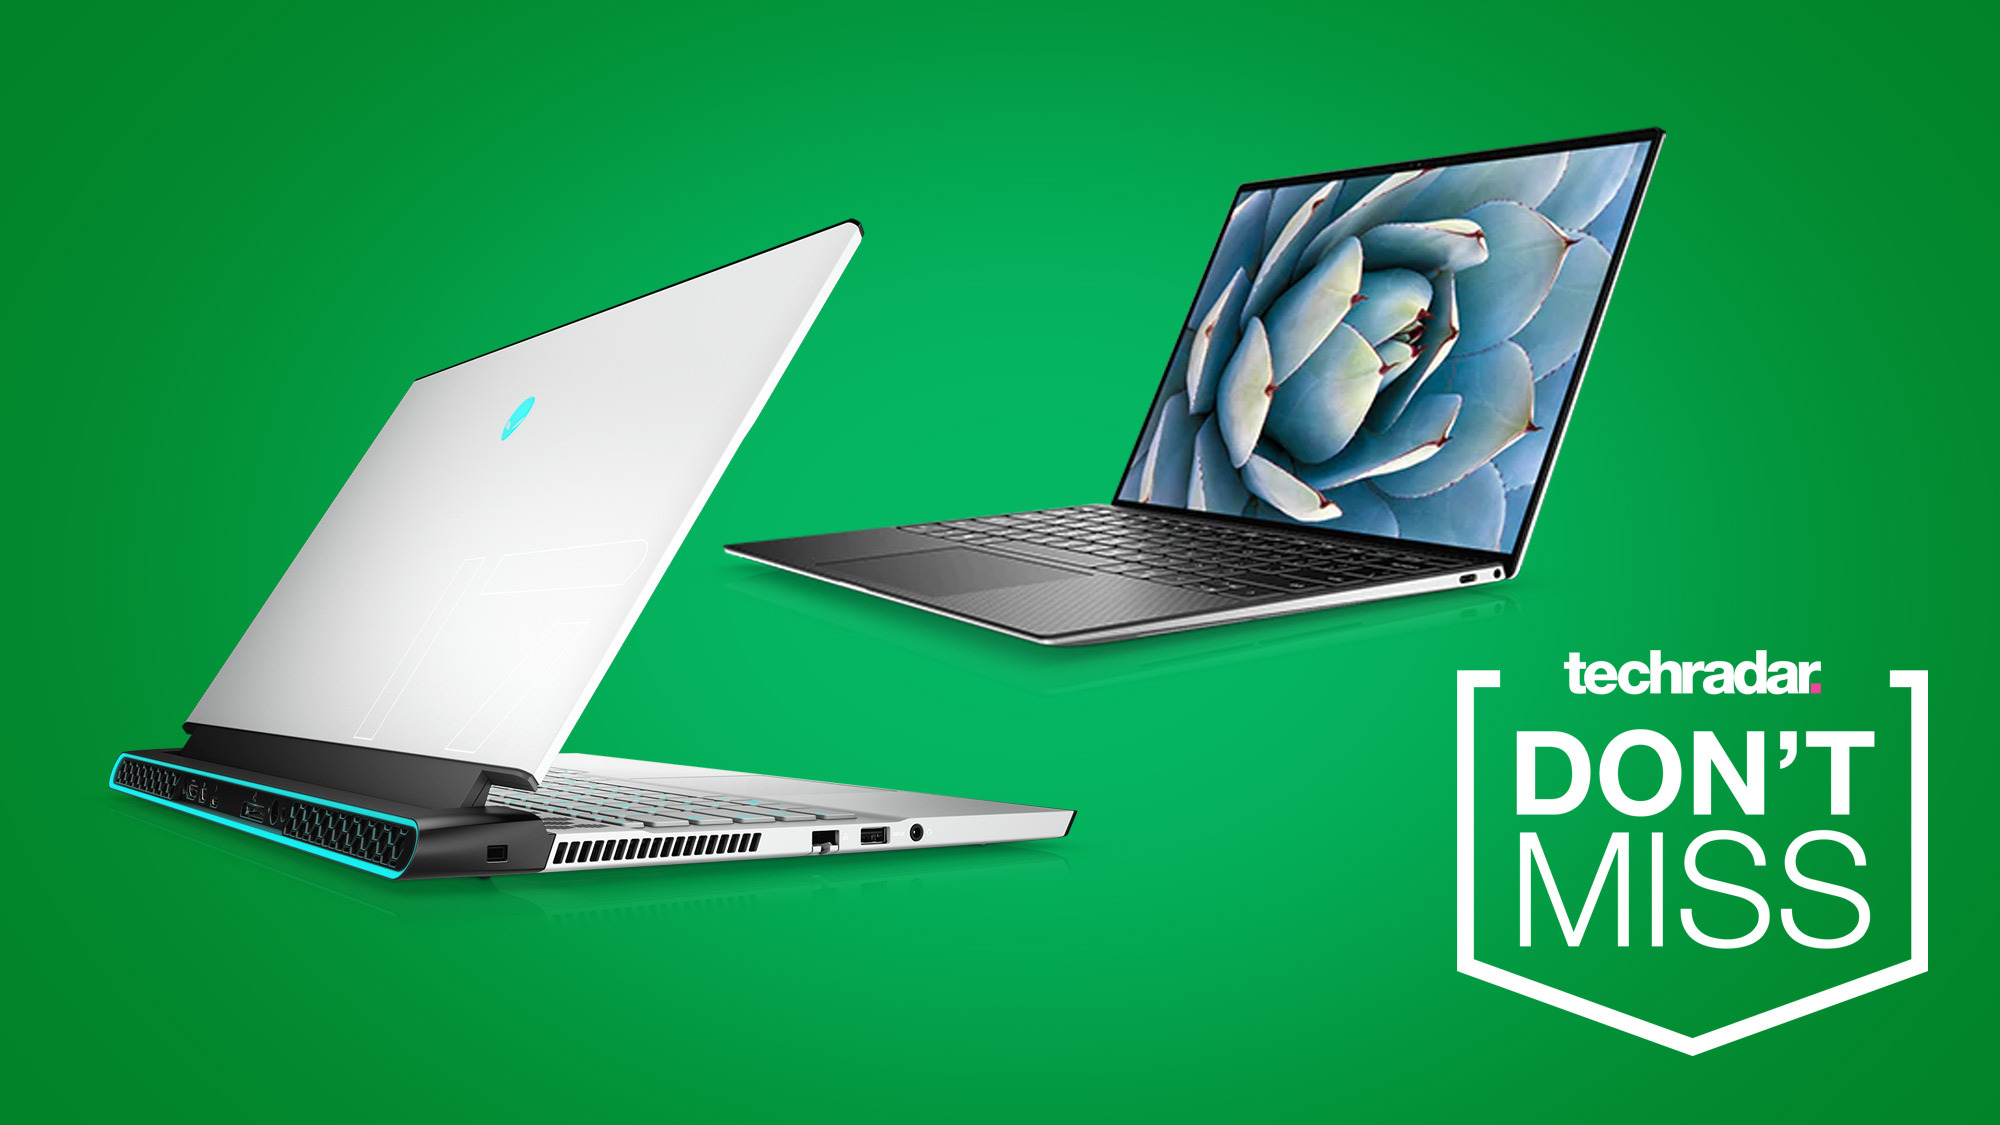 Memorial Day laptop deals don't miss these excellent offers from Dell